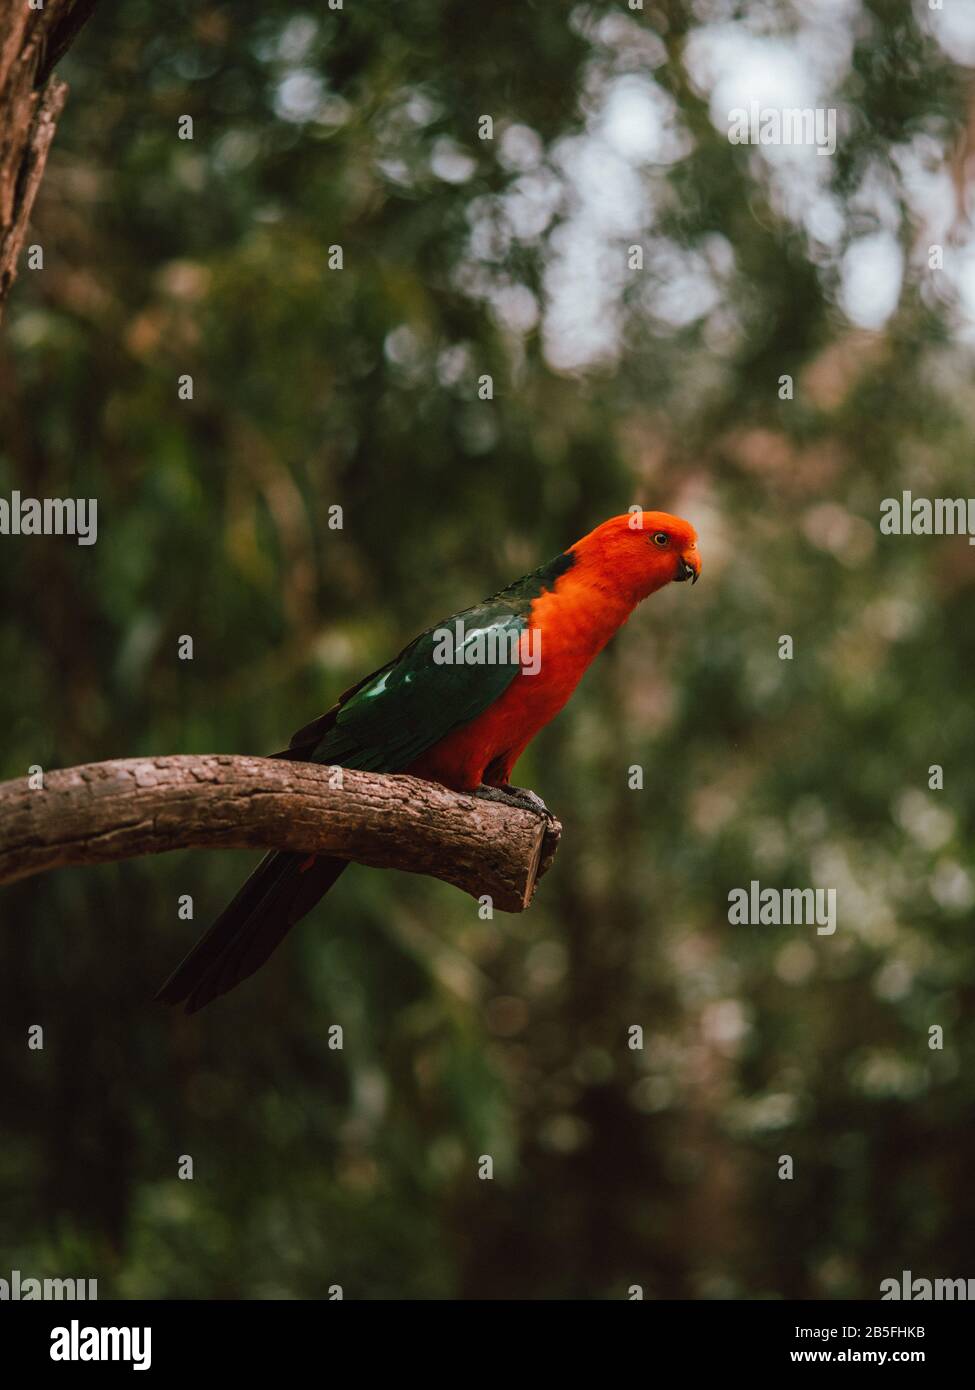 A colourful red bird on a branch in Australia Stock Photo